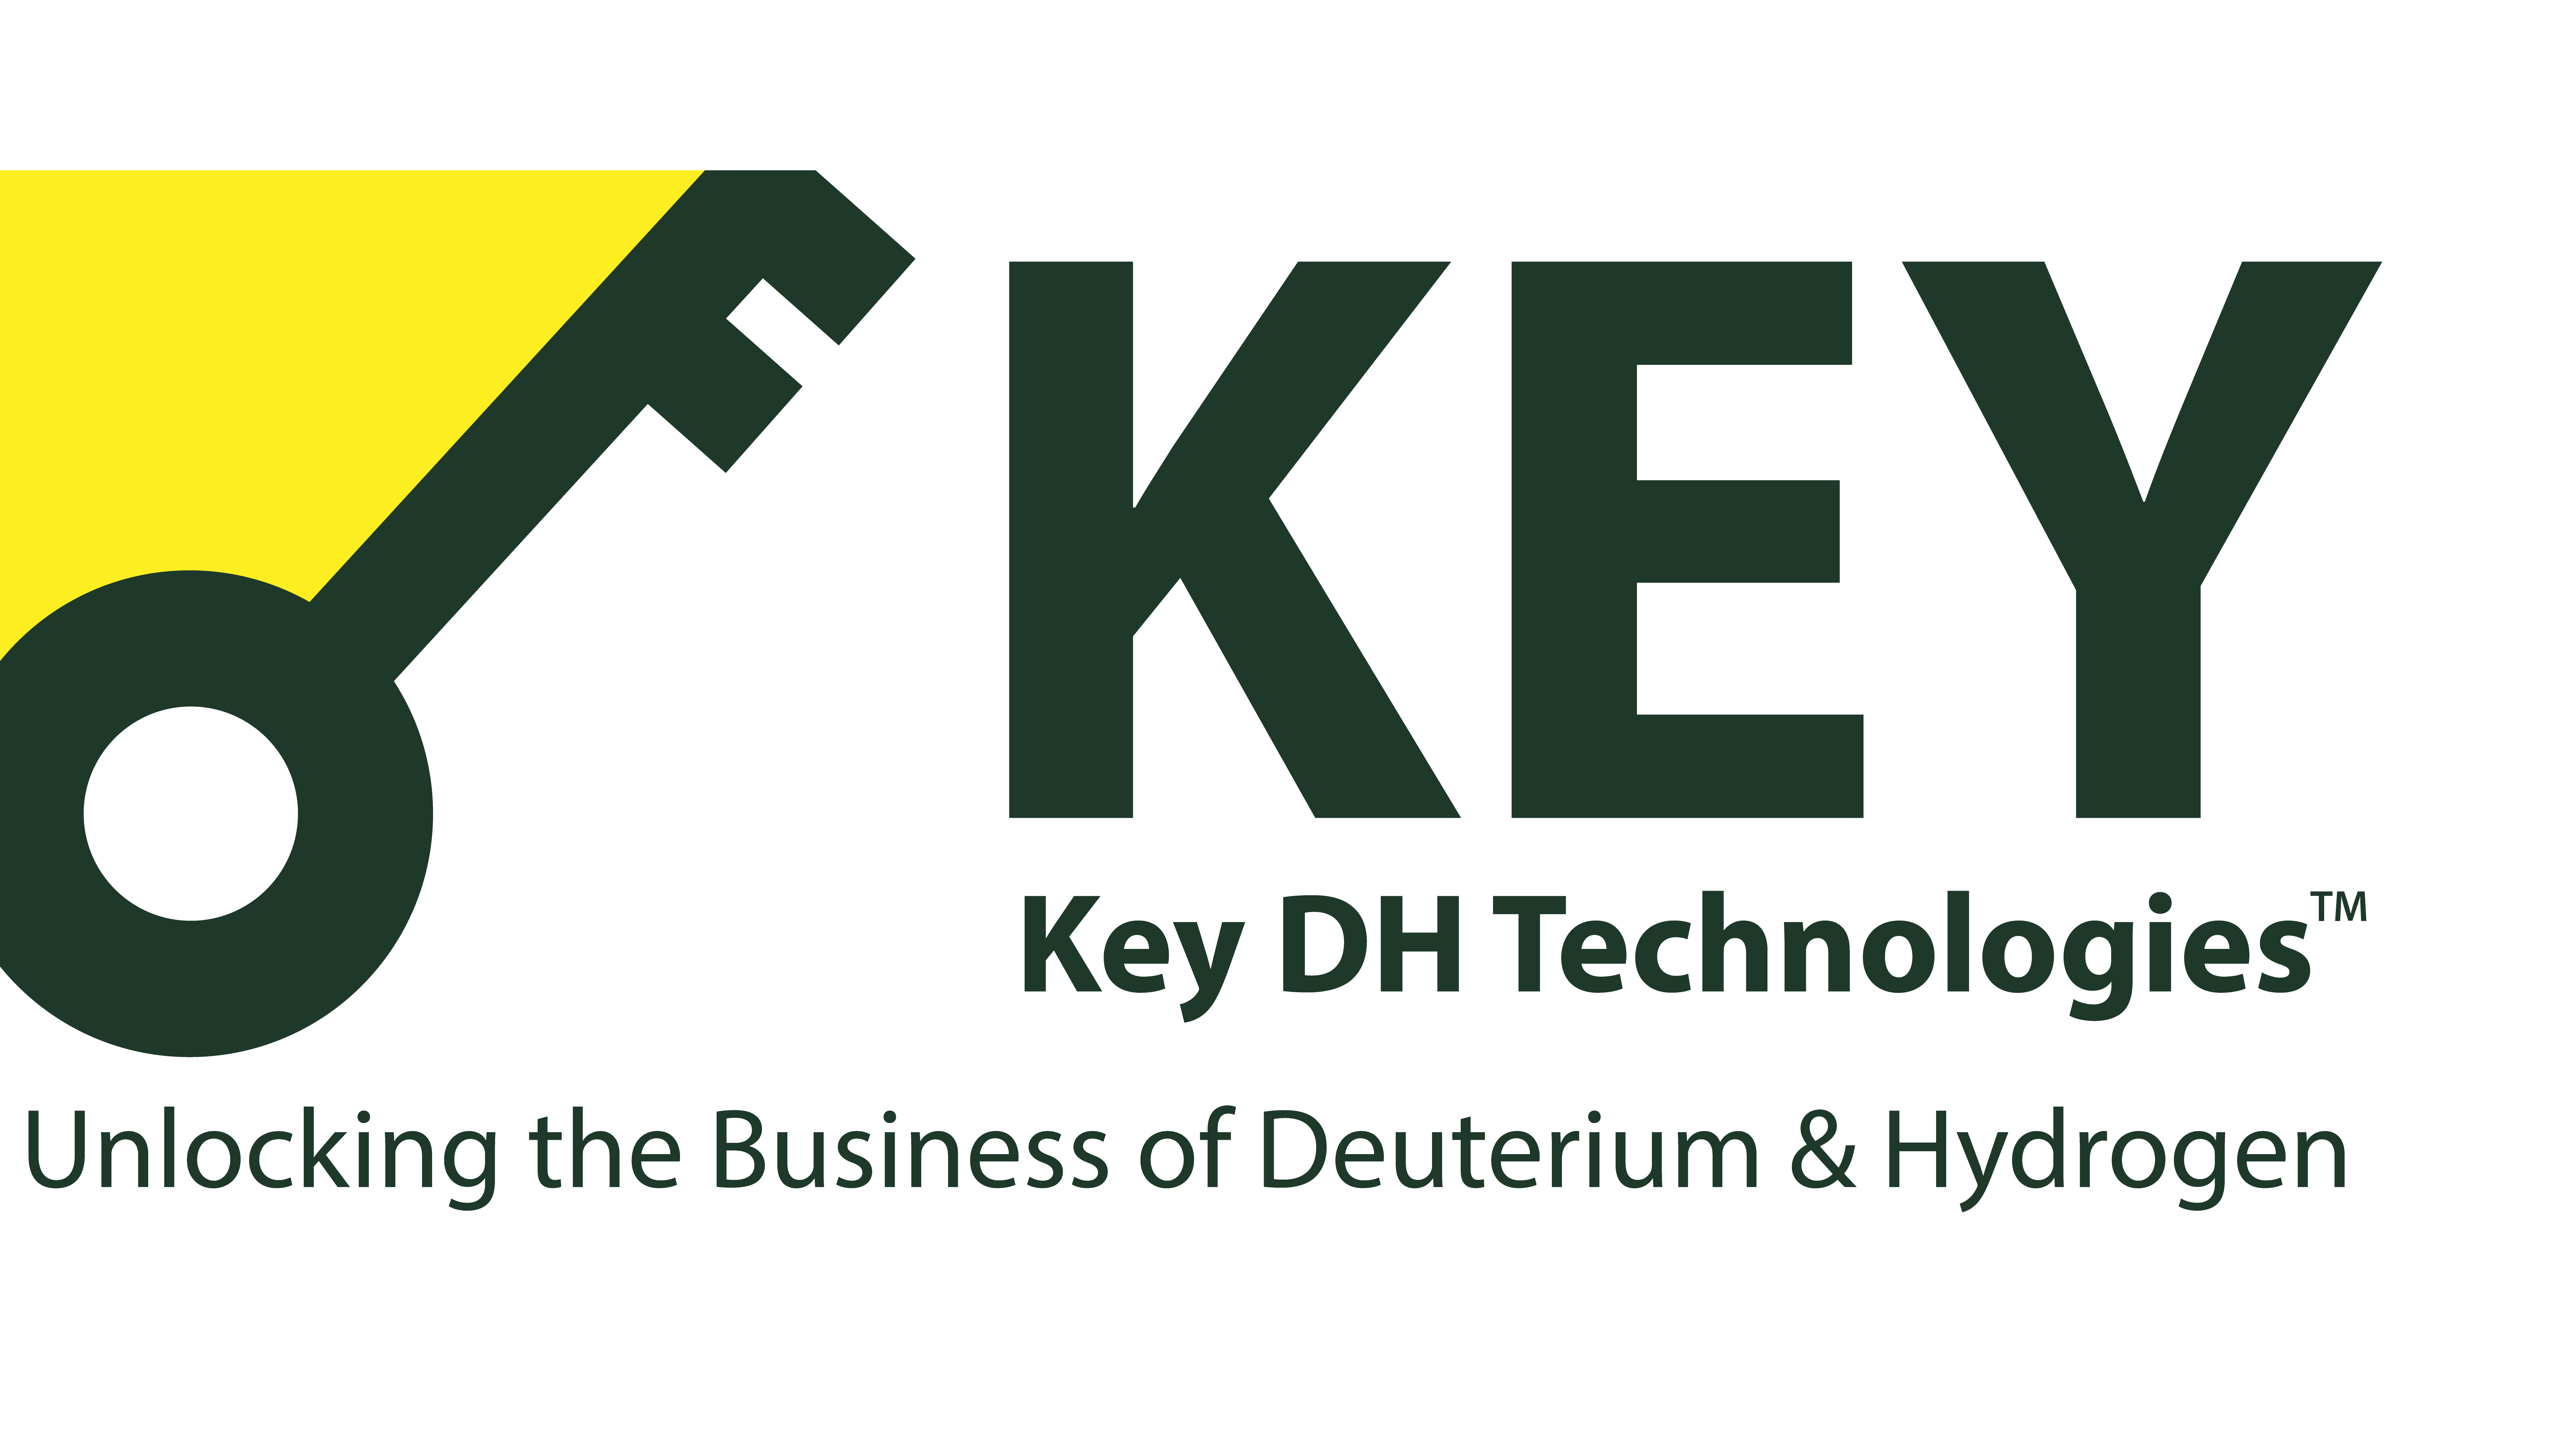 Key DH Technologies Inc., Tuesday, October 26, 2021, Press release picture